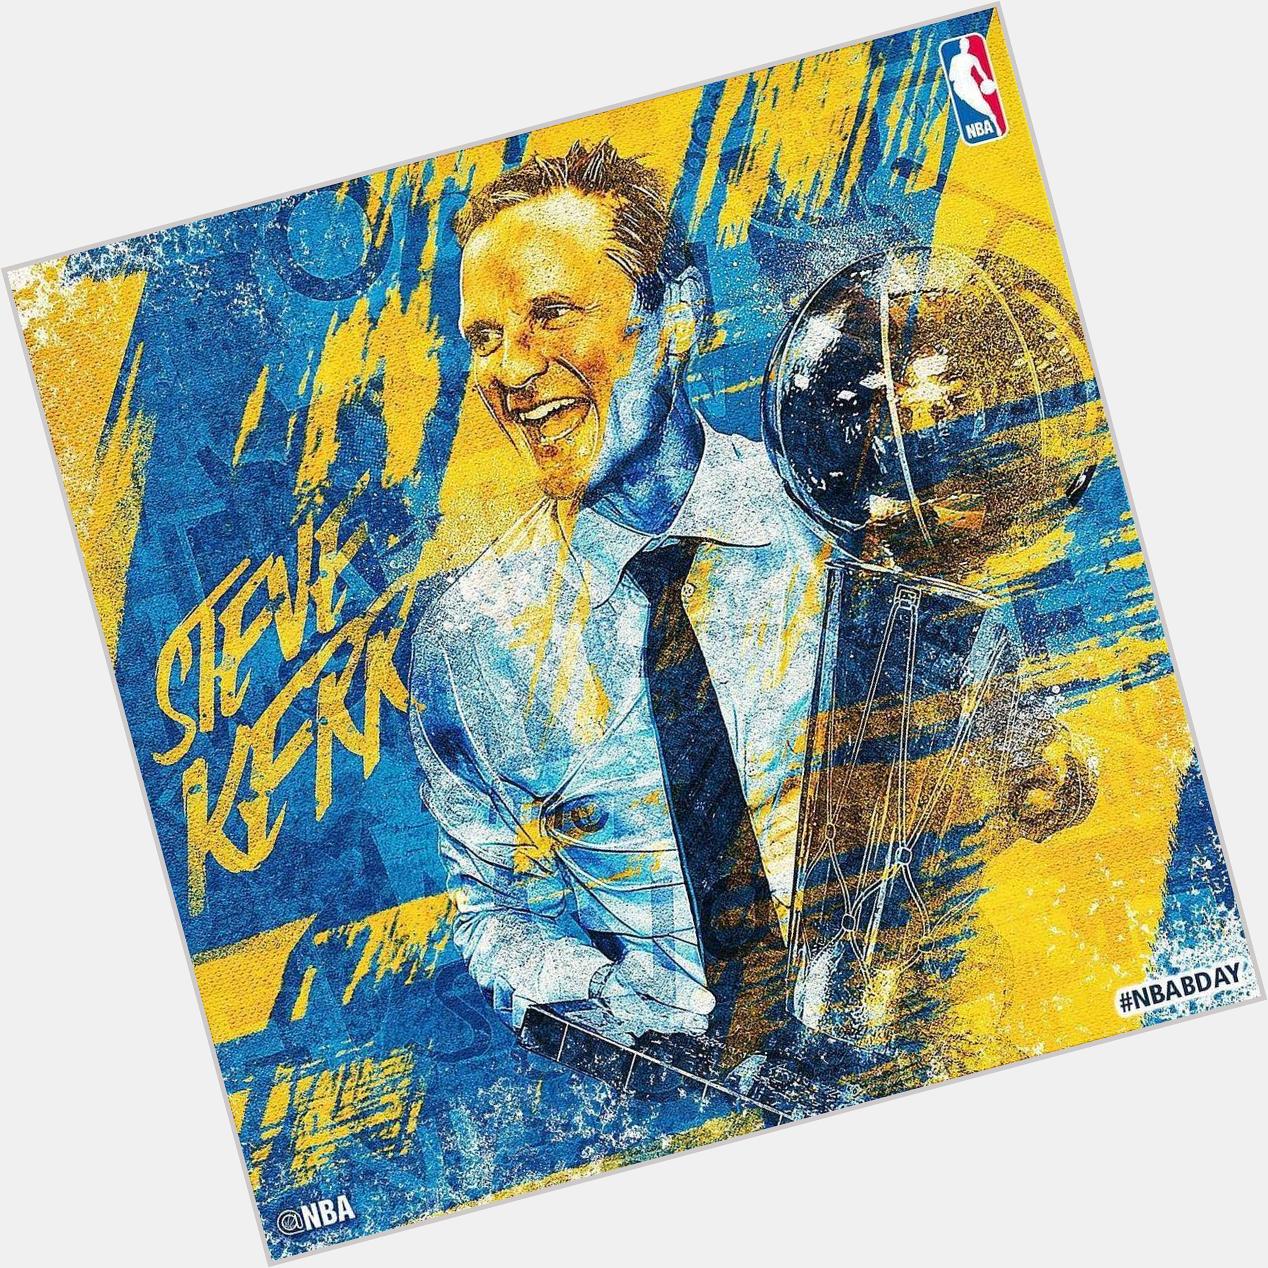  Join us in wishing Head Coach & 6x Champ STEVE KERR a HAPPY 50th BIRTHDAY! by 